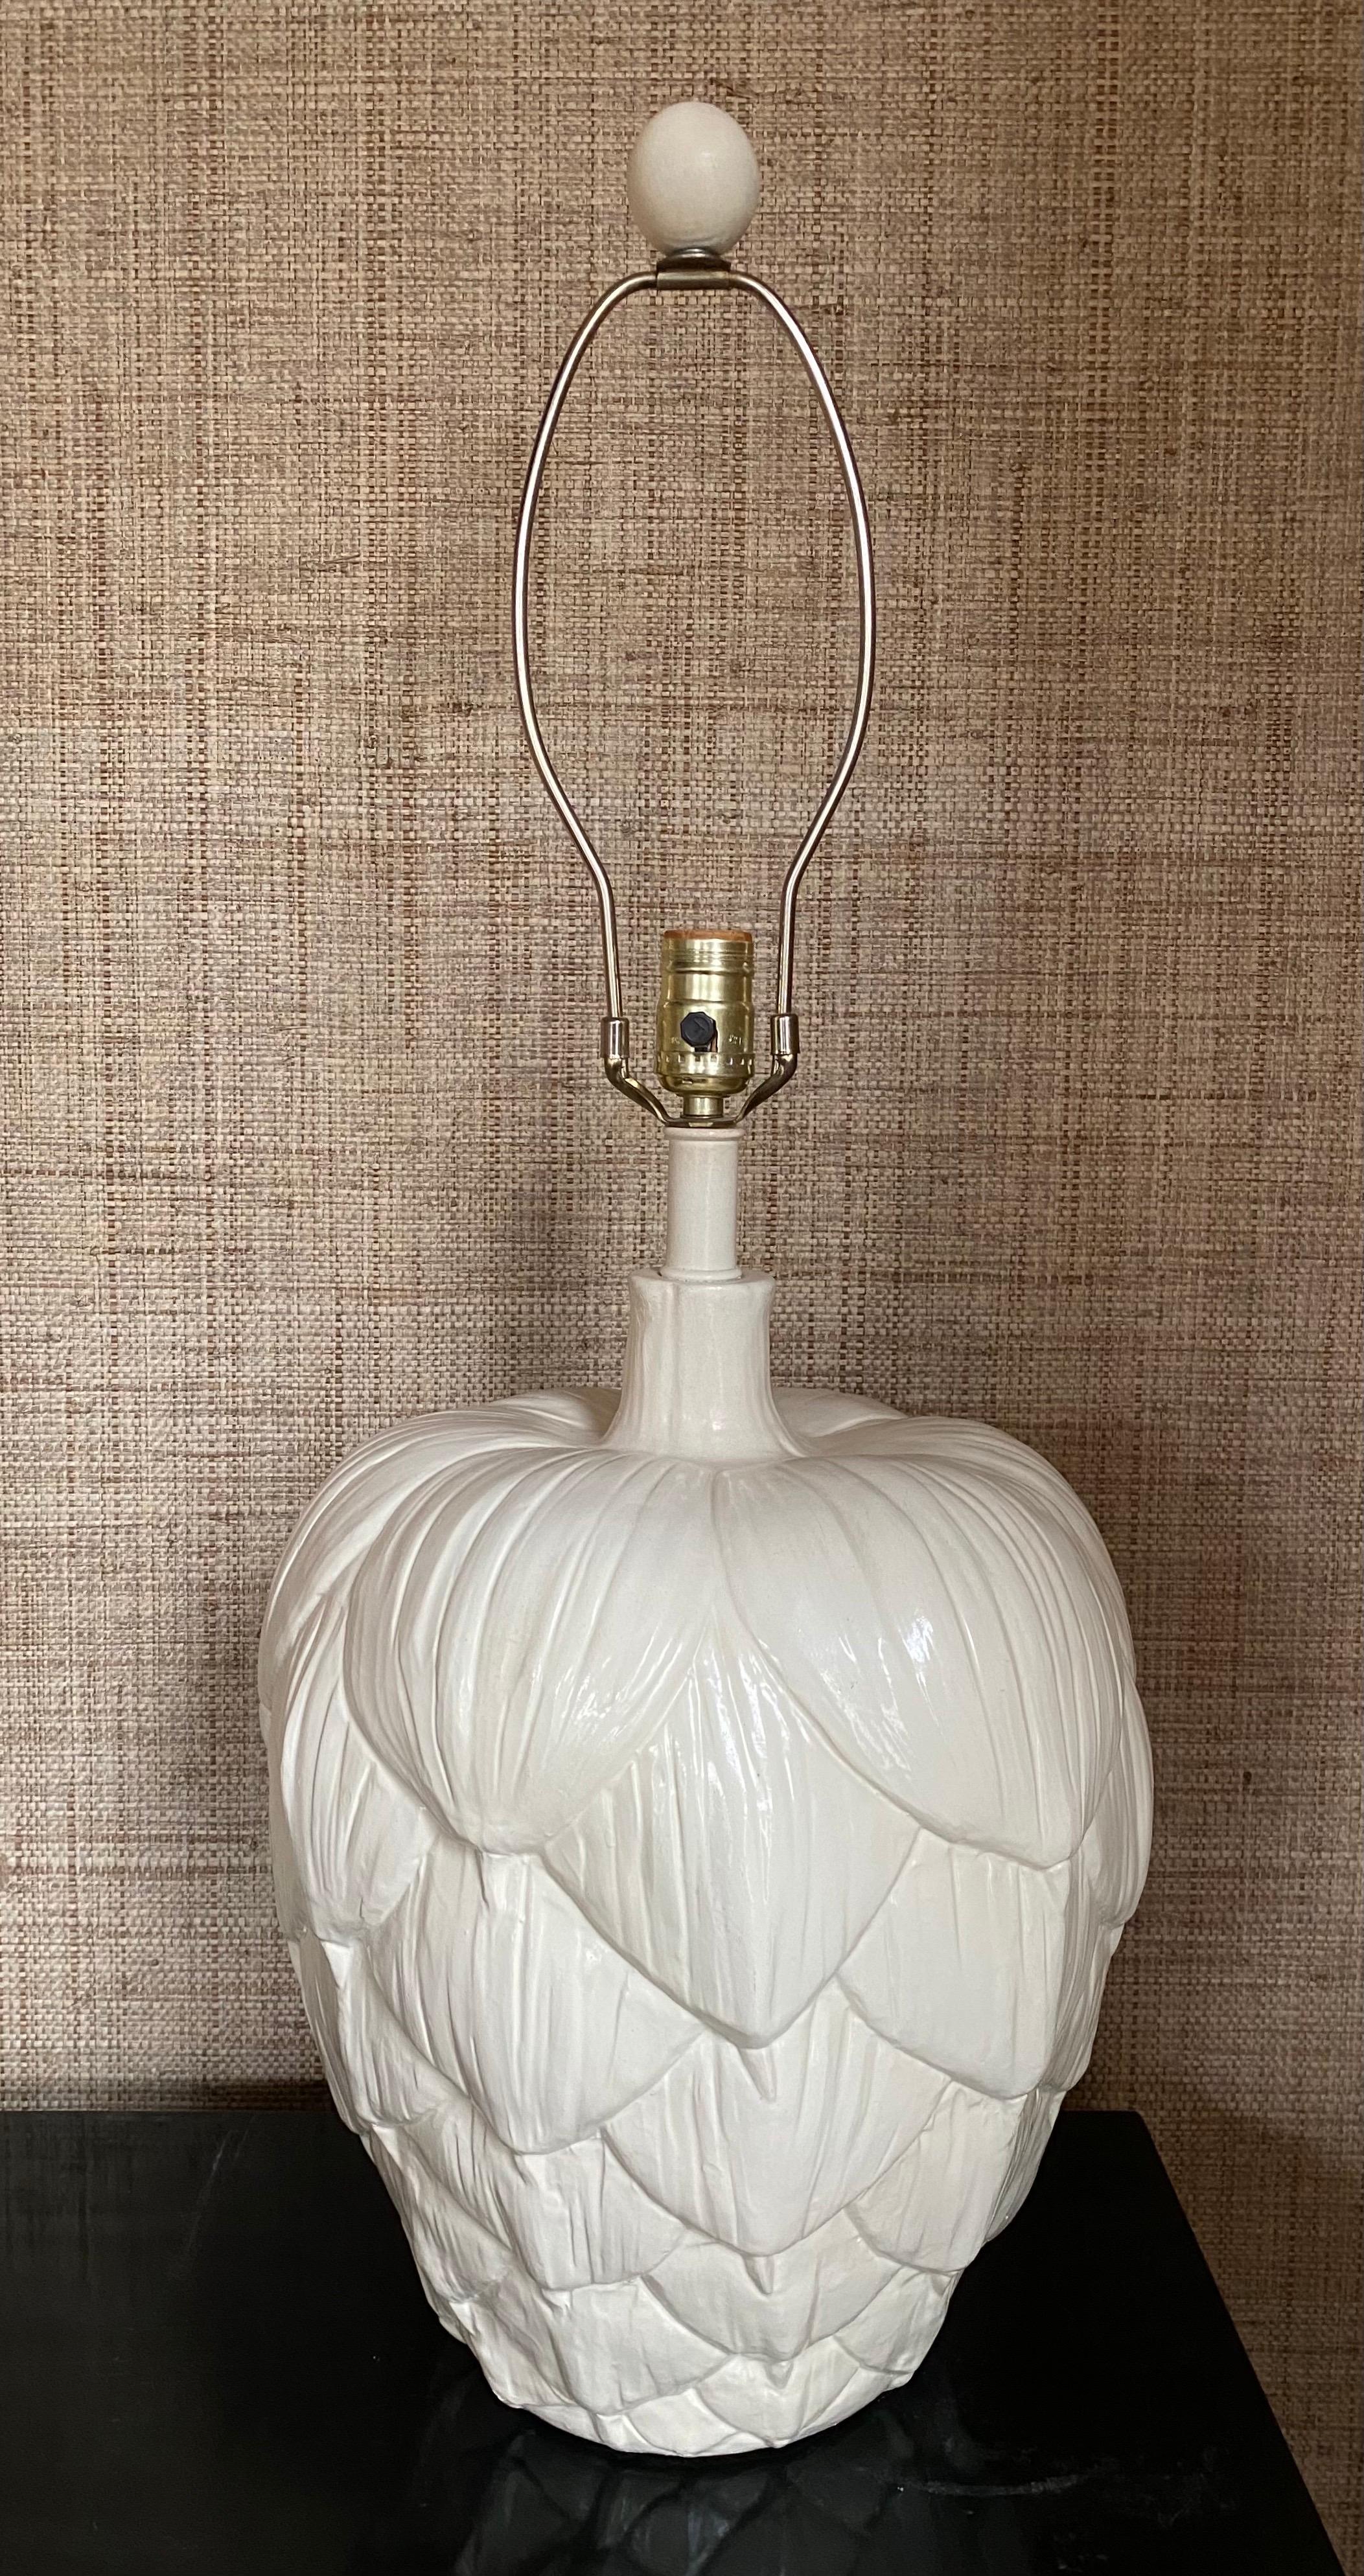 Vintage Mid-Century Modern cream or white artichoke table lamp. This large sculptural plaster lamp features a creamy white painted finish and dimensional carved-like leaves. In the style of Chapman. Lamp shade not included. 

Measures: 30 inches